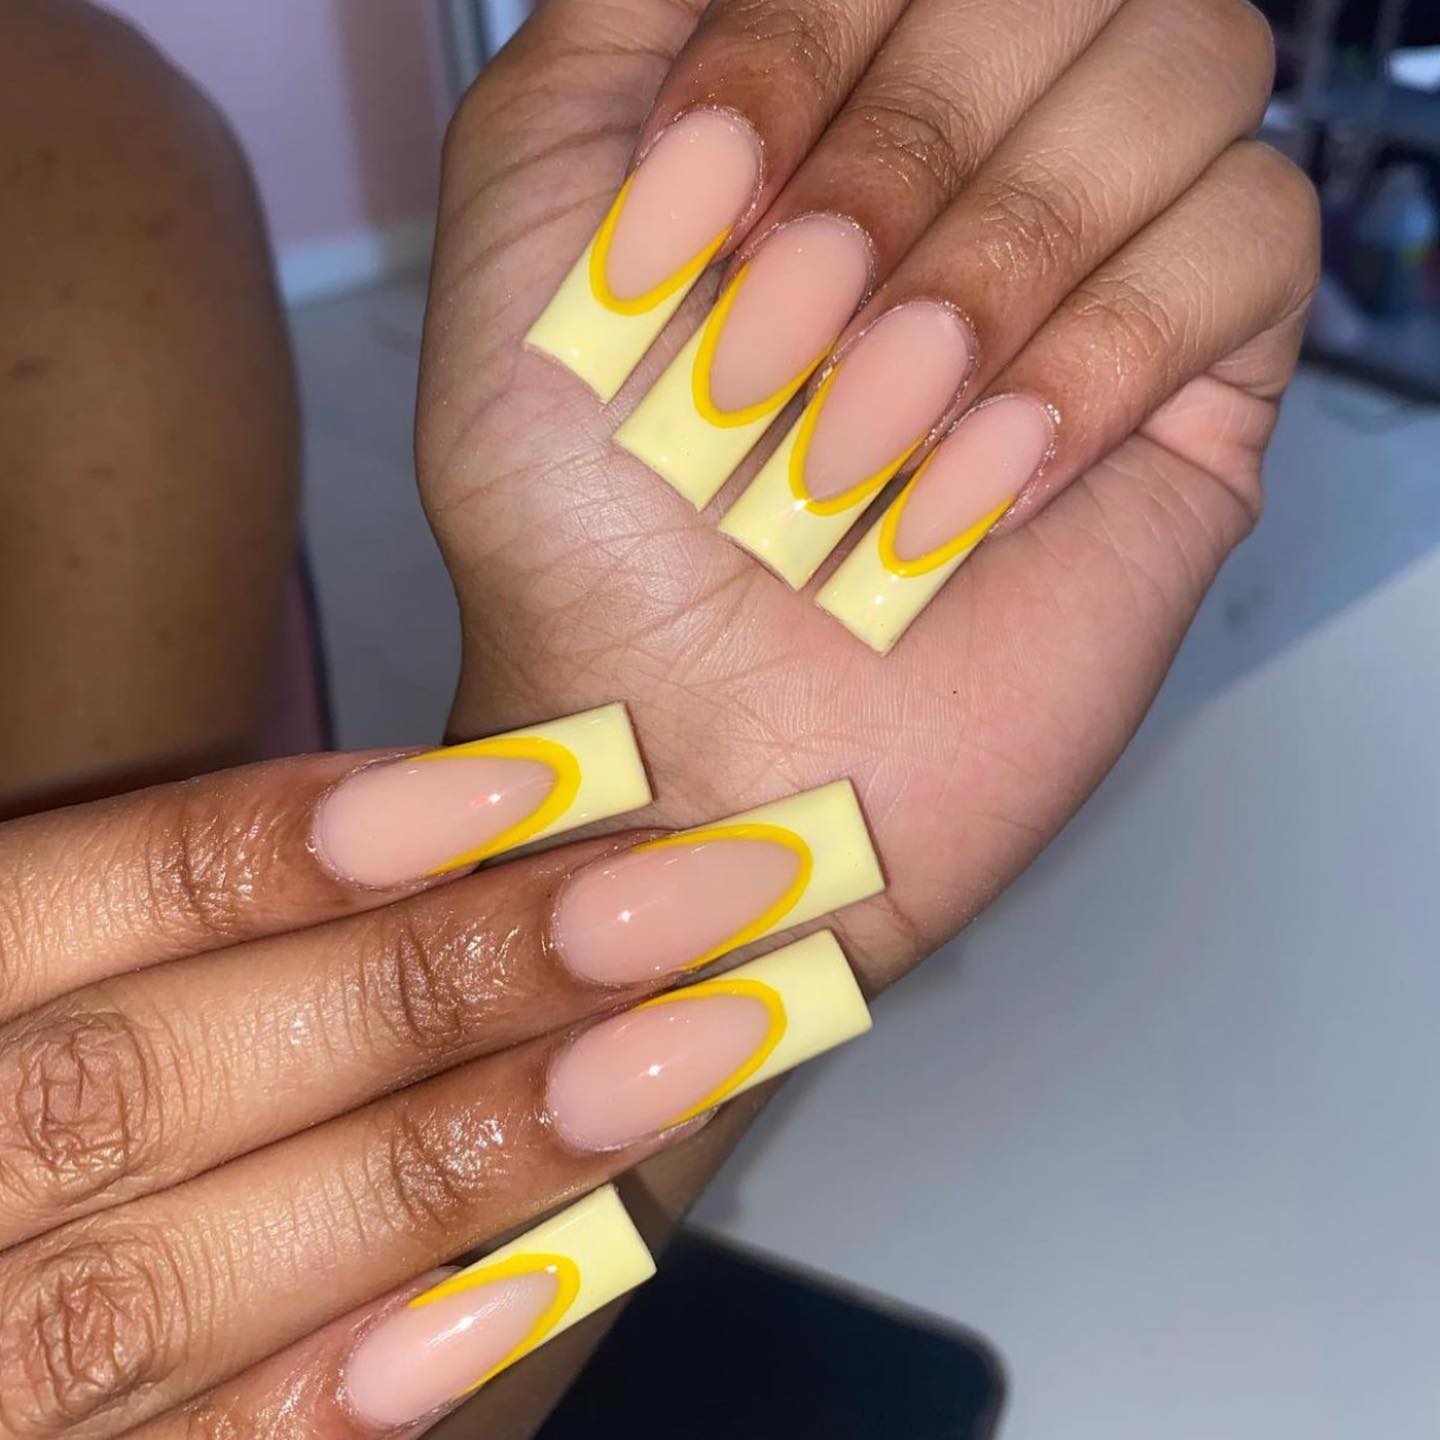 11 Popular Summer Nail Colors for 2020 - An Unblurred Lady